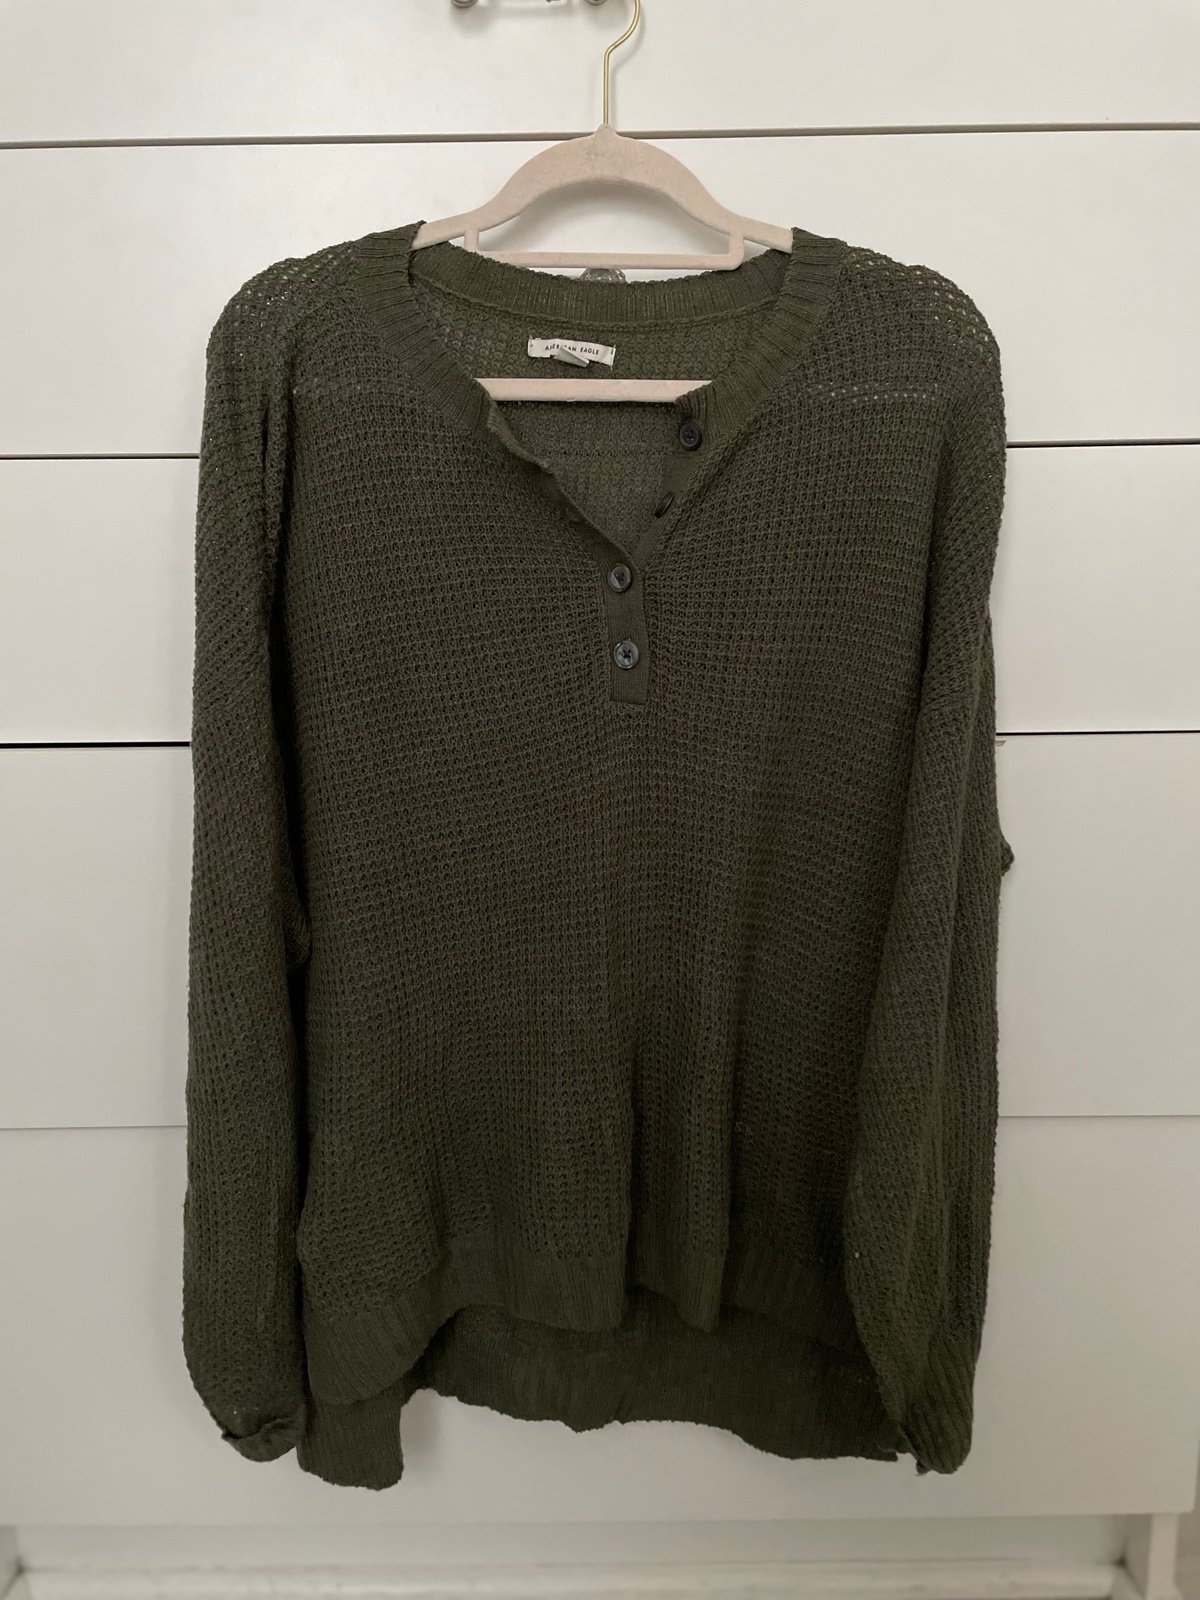 floor price American eagle henley Sweater fnTbeS0or High Quaity